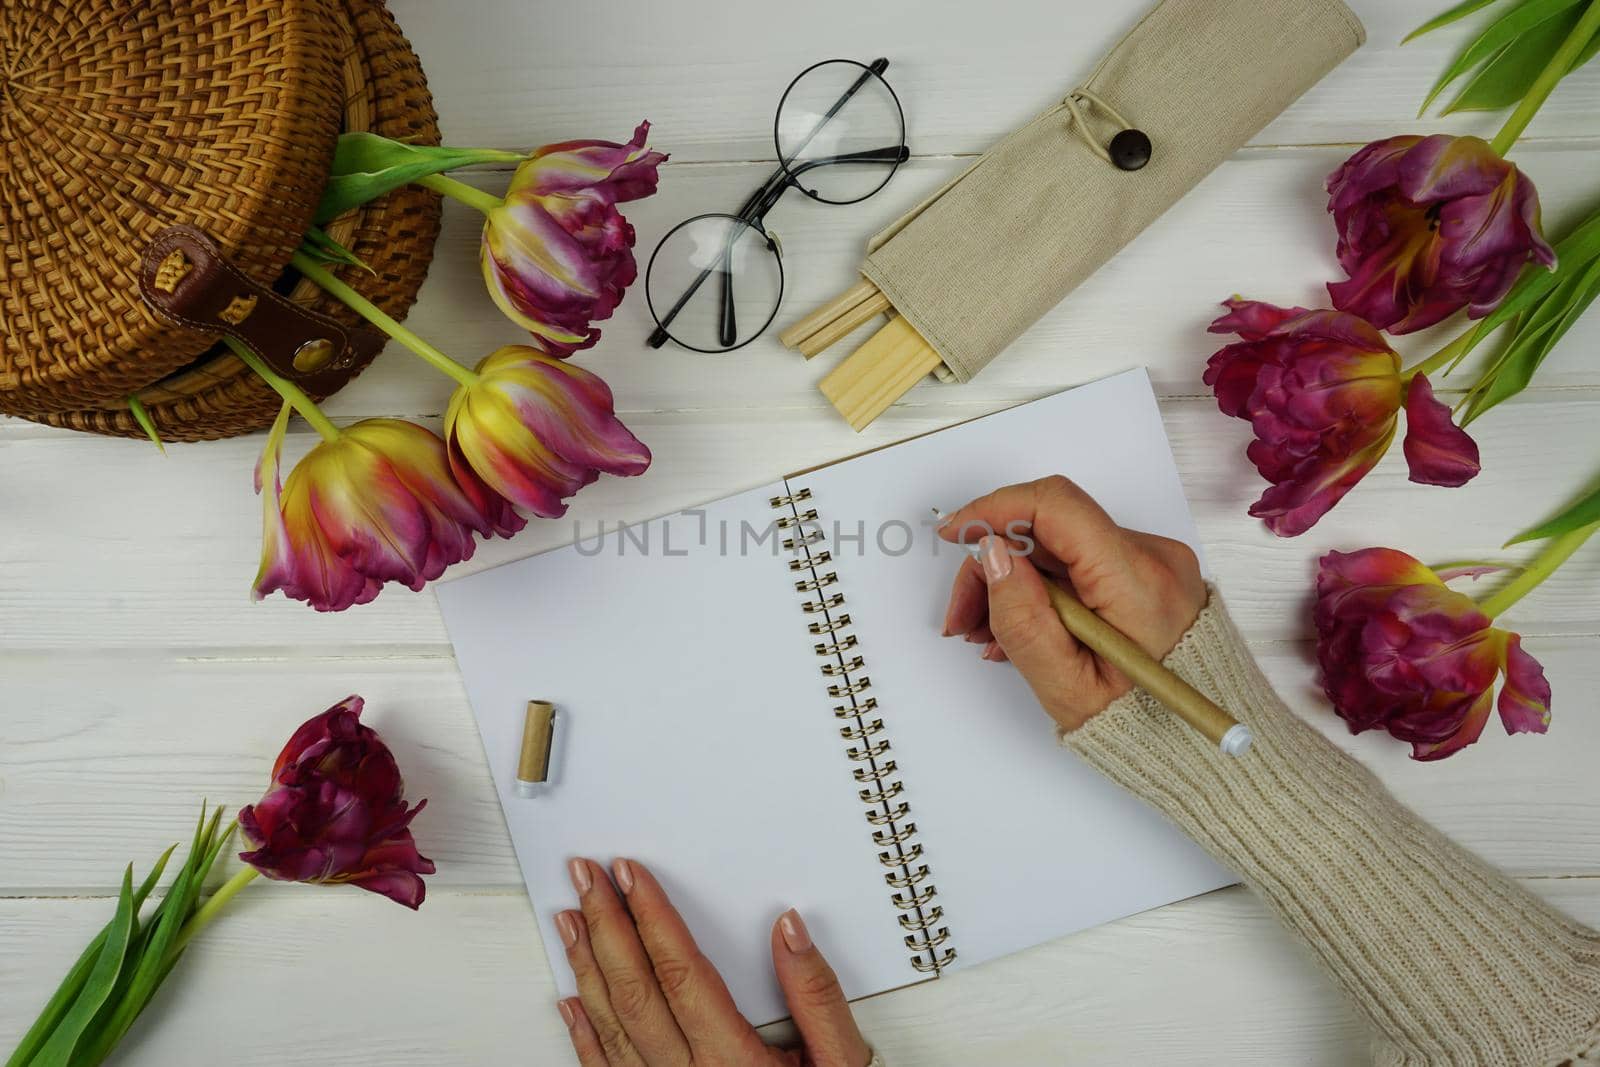 A woman's hand holds a pen and writes in a notebook by Spirina